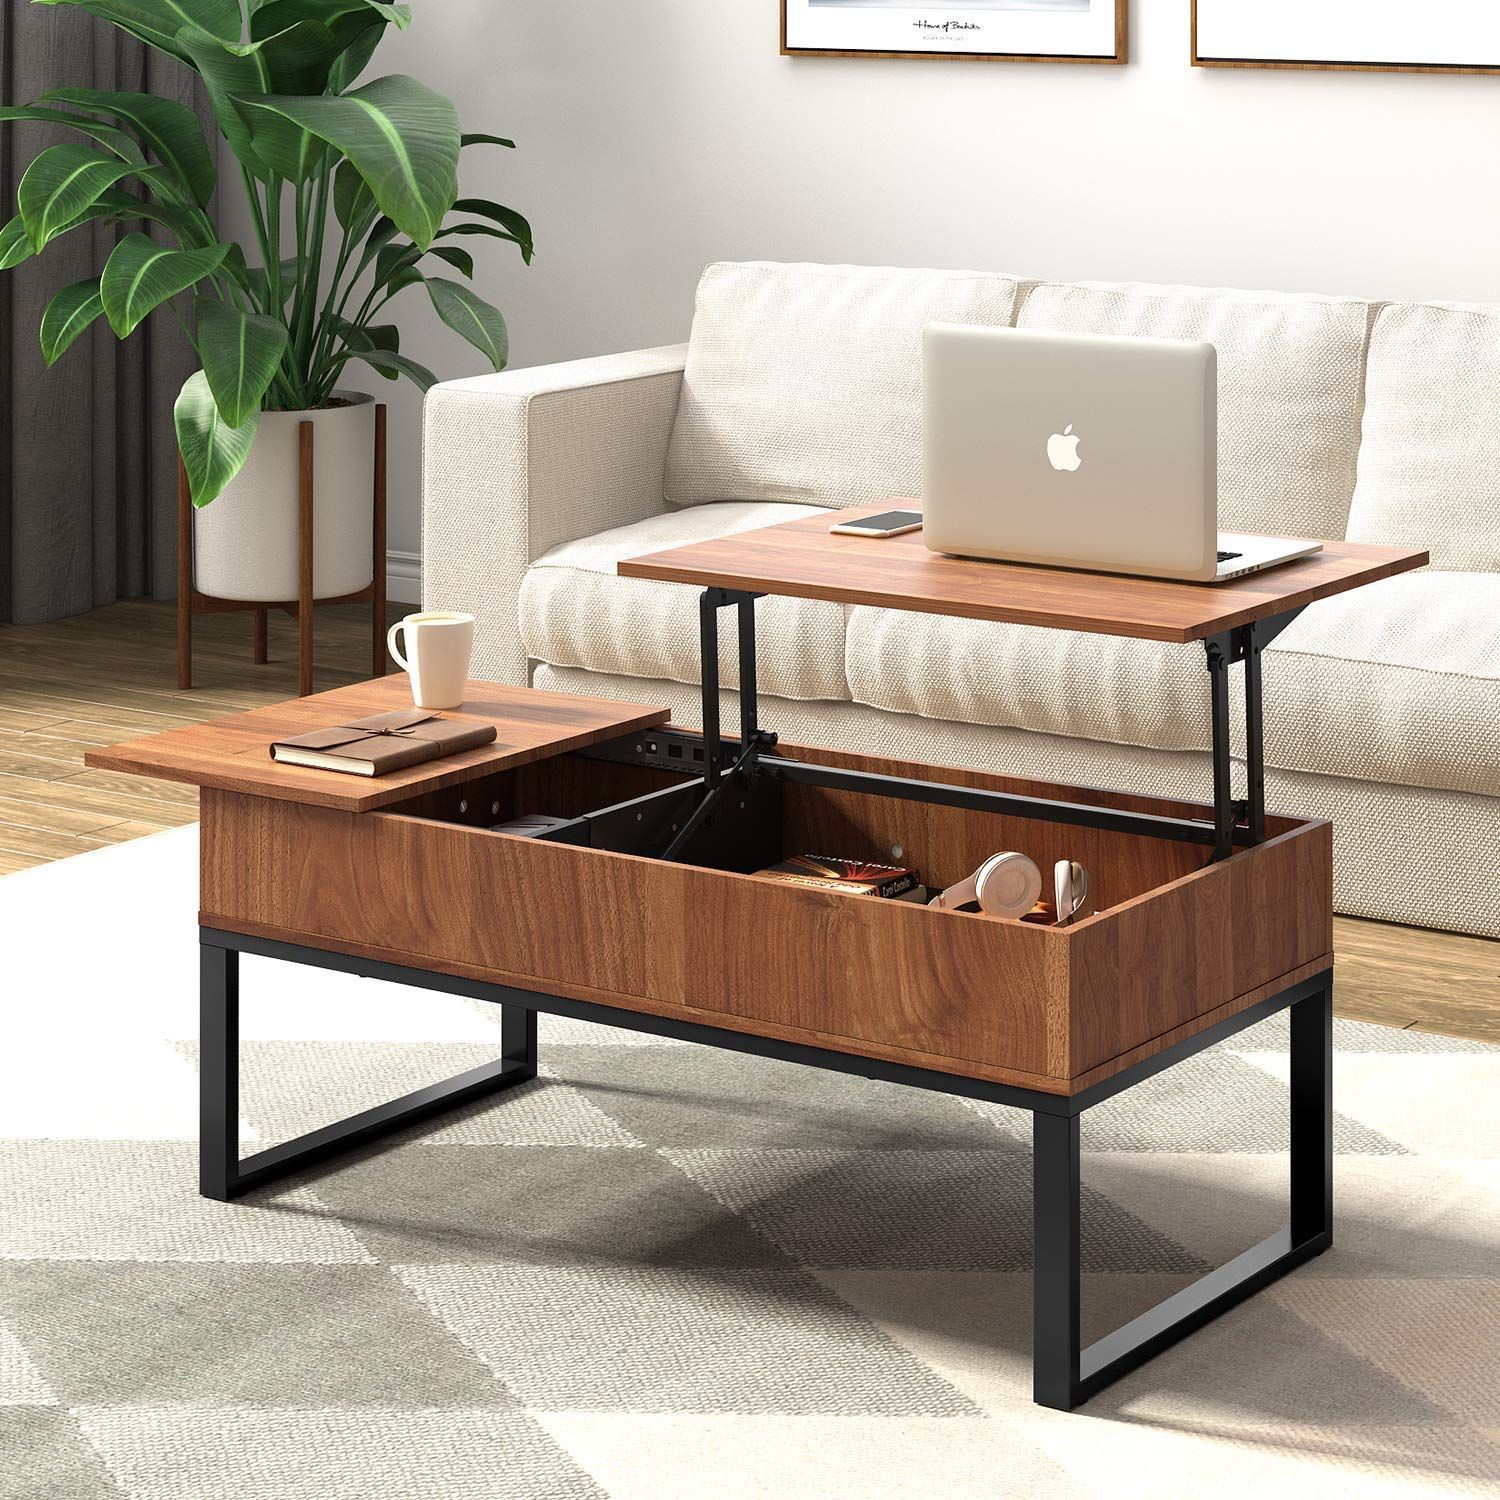 Wlive Wood Coffee Table With Adjustable Lift Top Table, Metal Frame Intended For Lift Top Coffee Tables With Storage Drawers (Gallery 20 of 20)